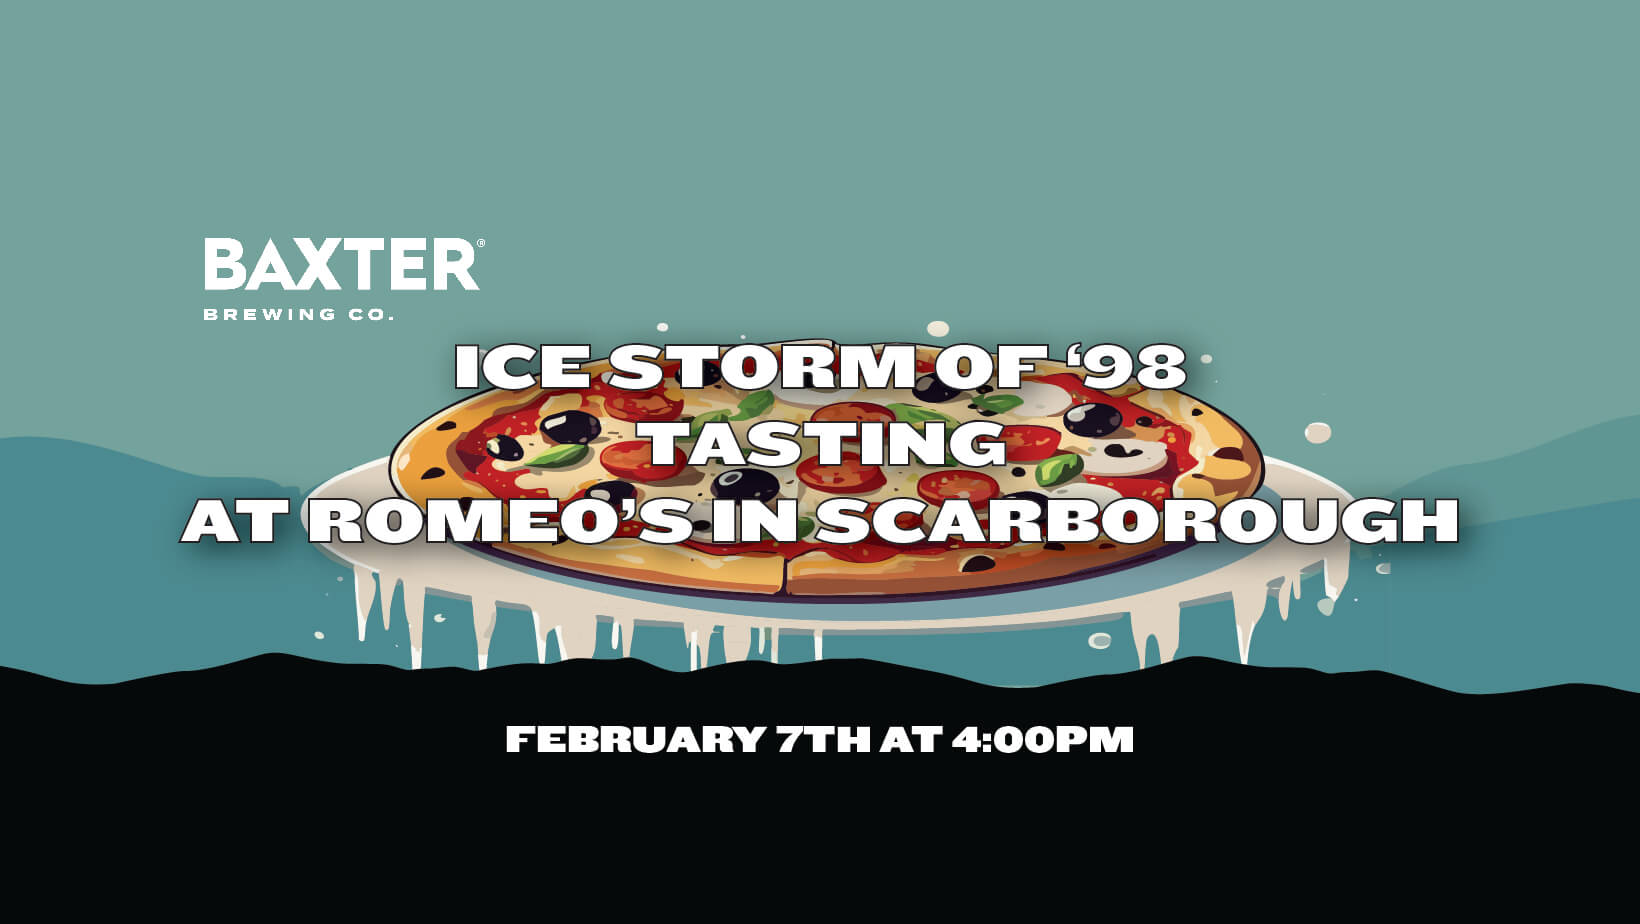 image promoting a tasting at Romeo's Scarborough on February 7th